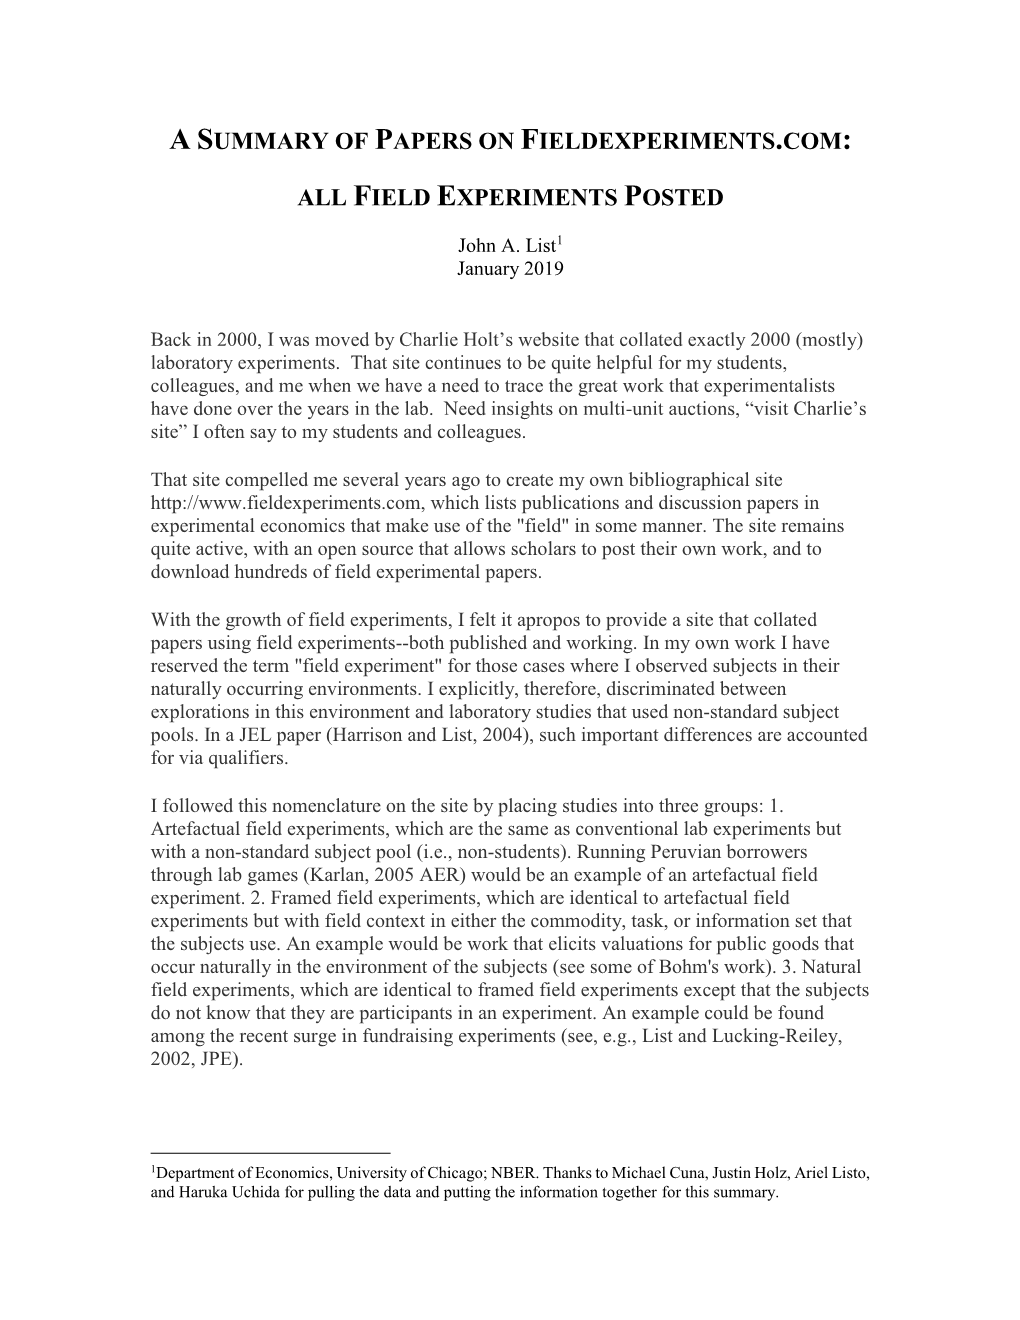 A Summary of Papers on Fieldexperiments.Com